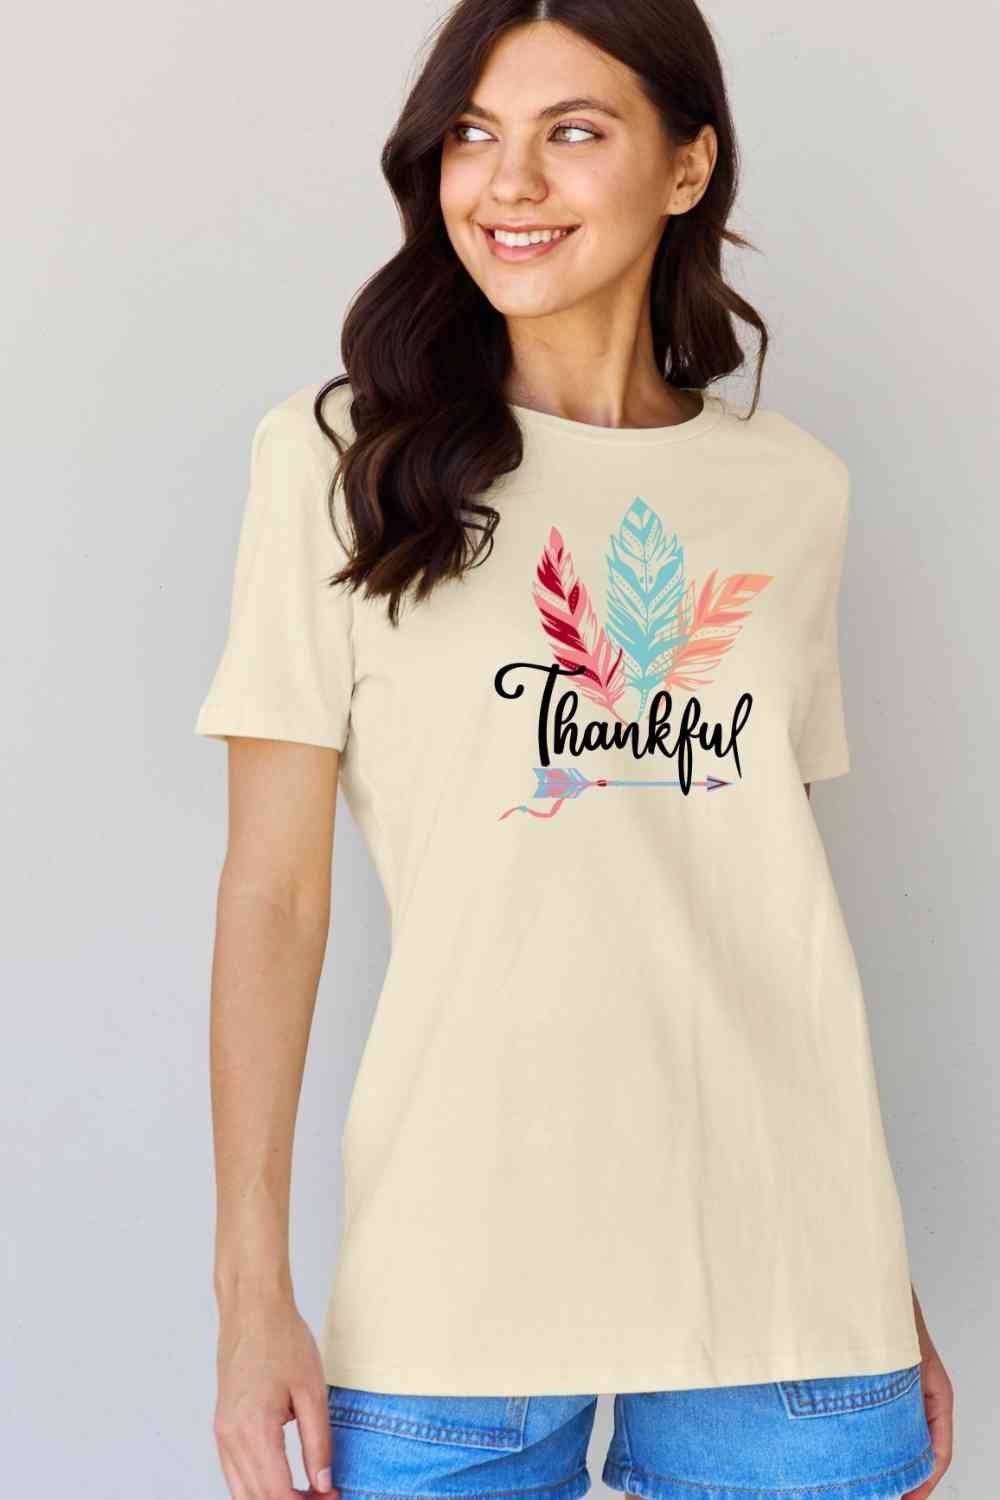 Simply Love Full Size THANKFUL Graphic T-Shirt BLUE ZONE PLANET